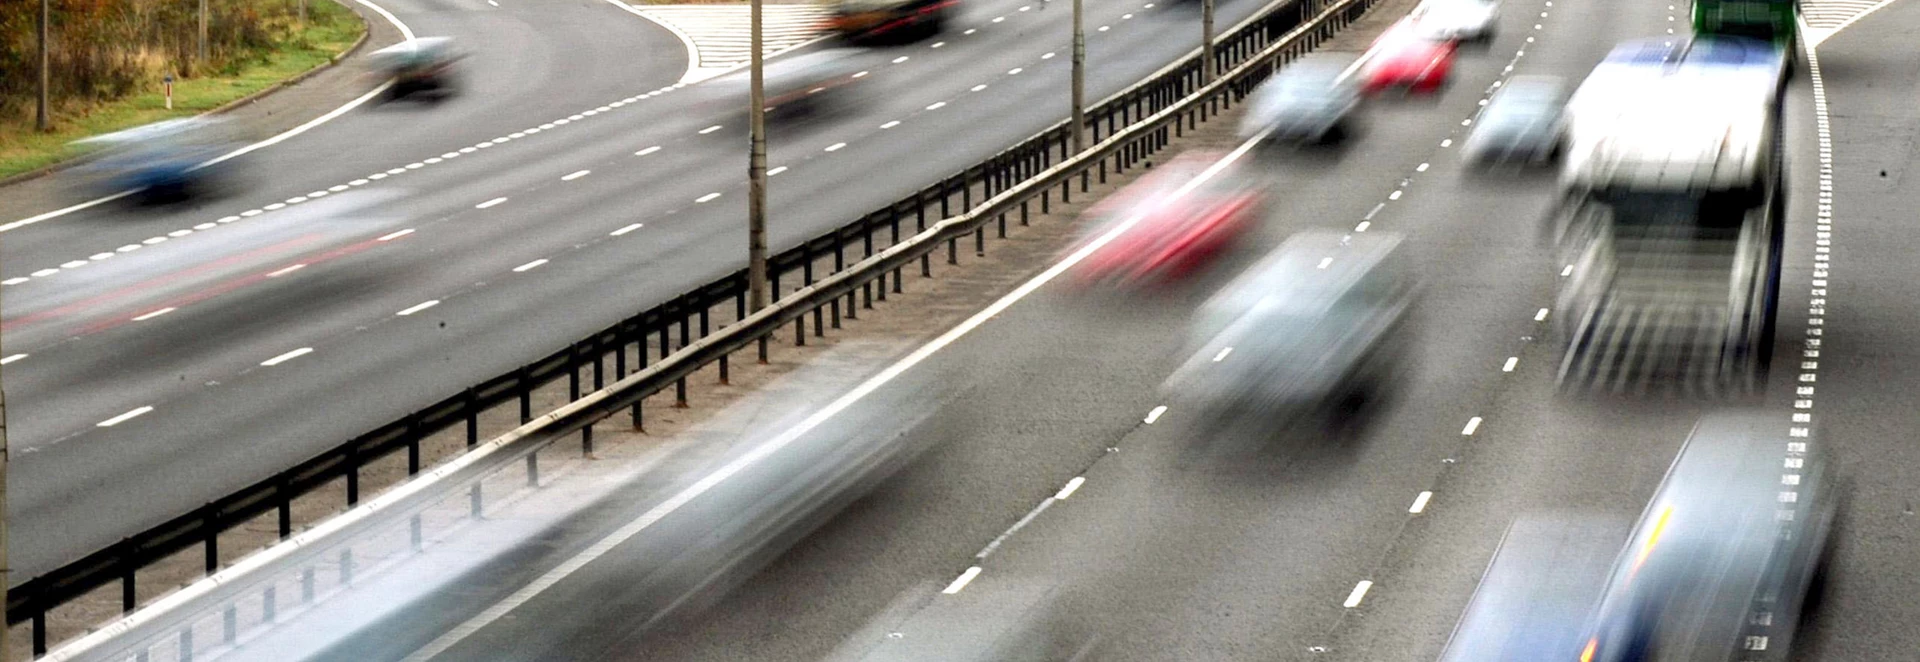 Why the DVLA can fine you £1,000 for this simple driving licence mistake